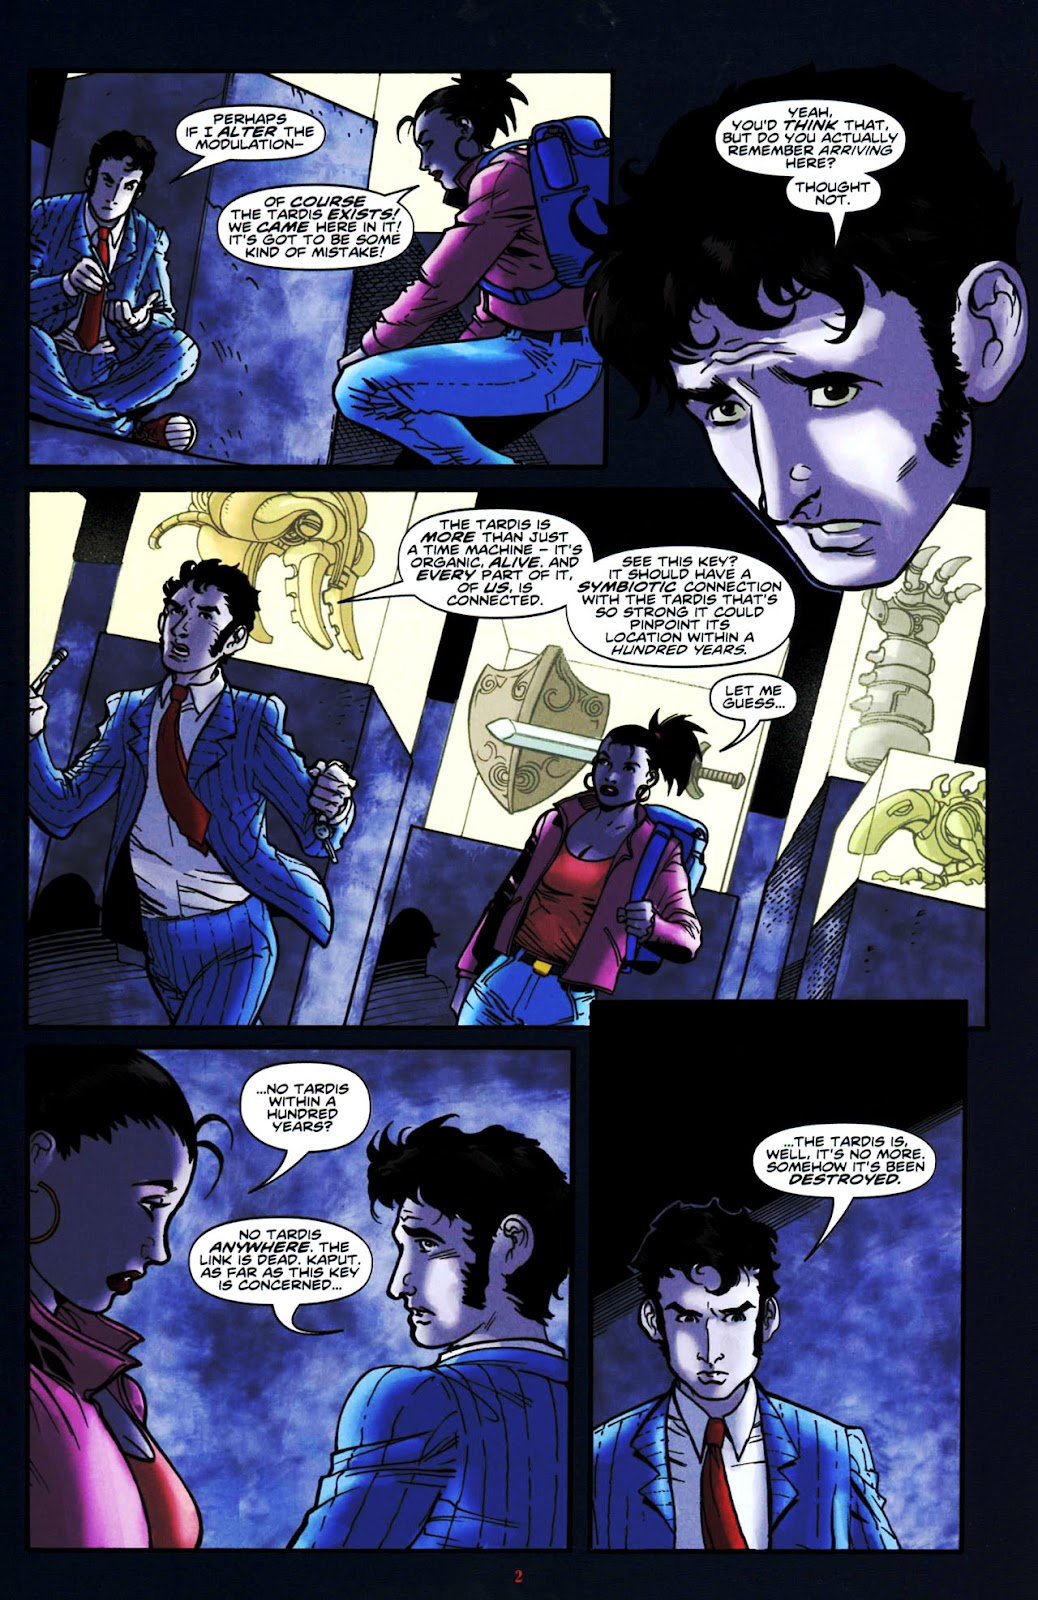 Doctor Who: The Forgotten issue 3 - Page 4